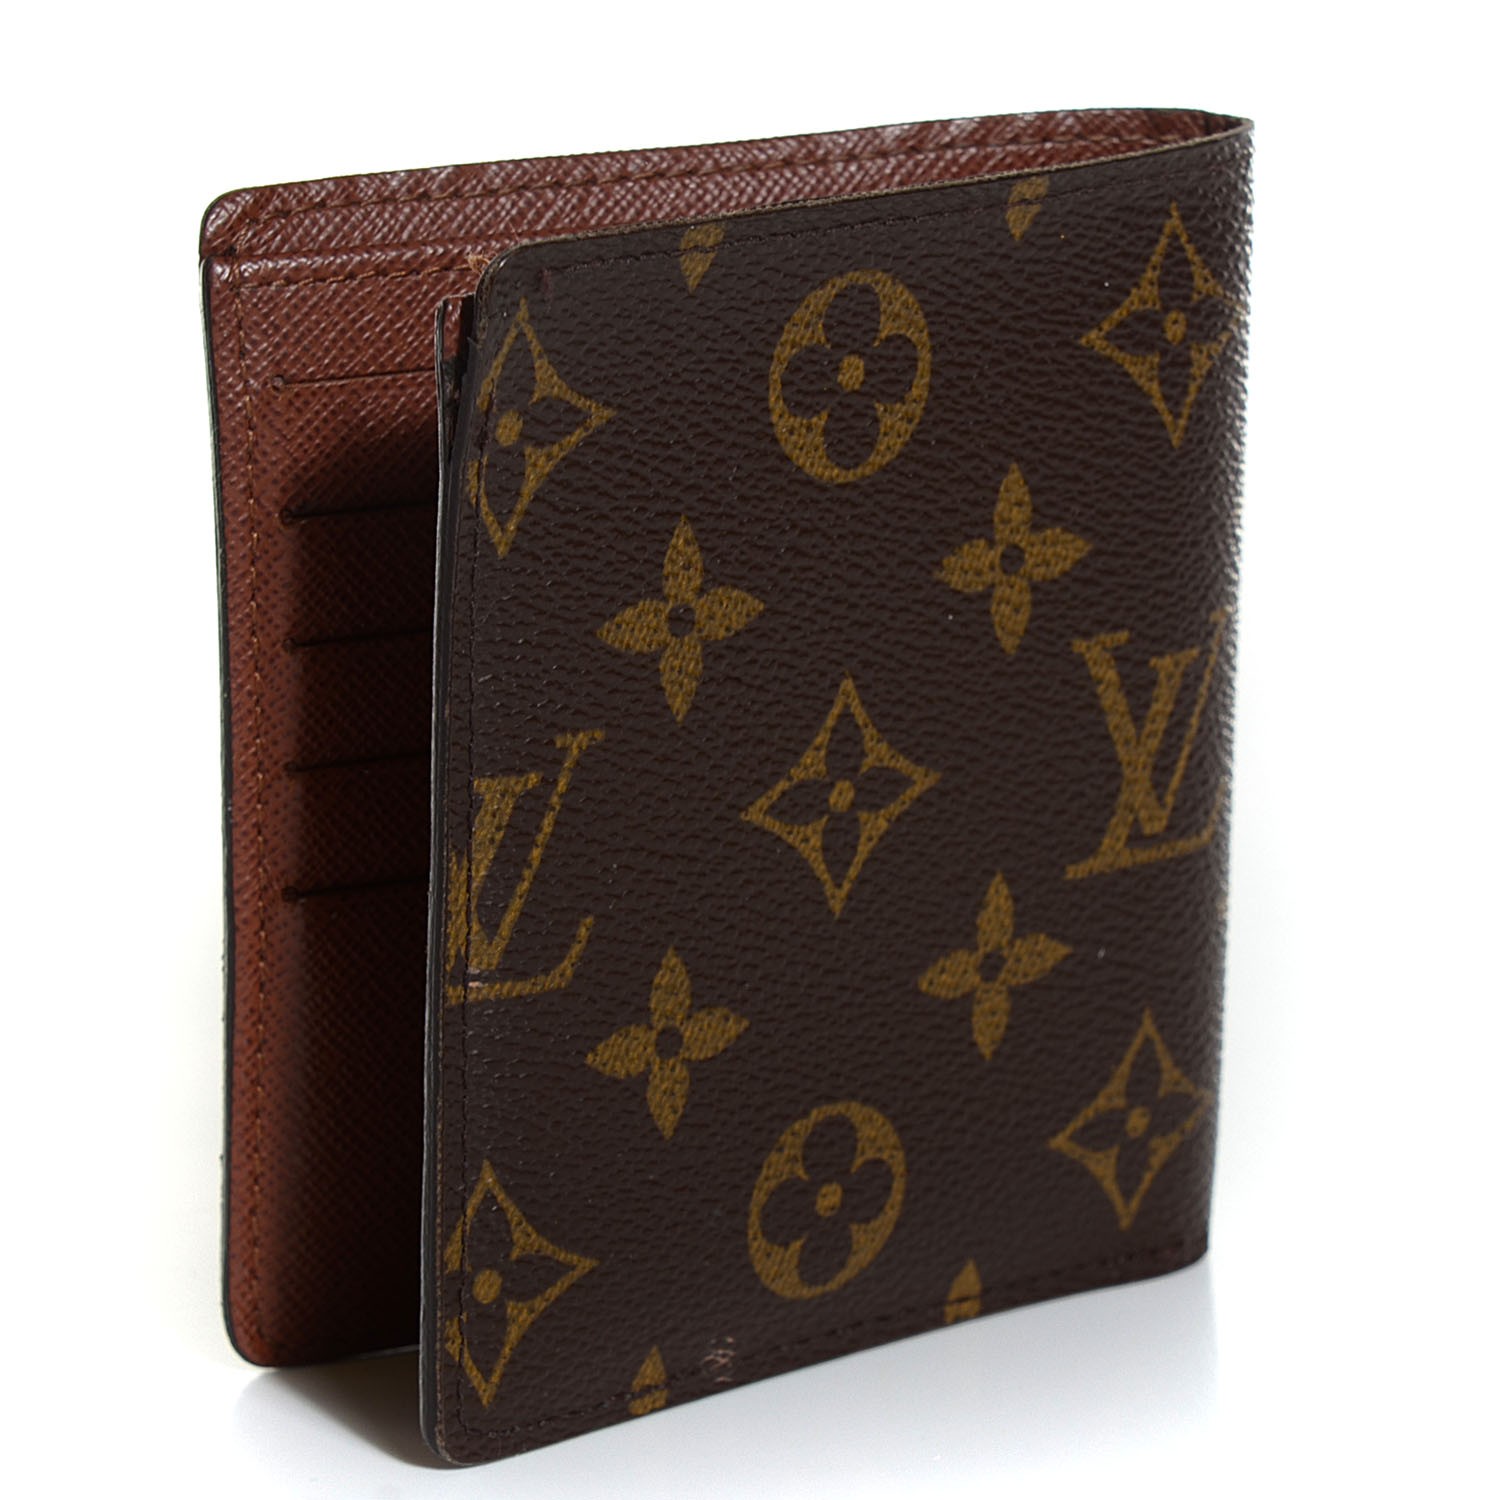 Extra Large Louis Vuitton Wallets For Men | Literacy Ontario Central South